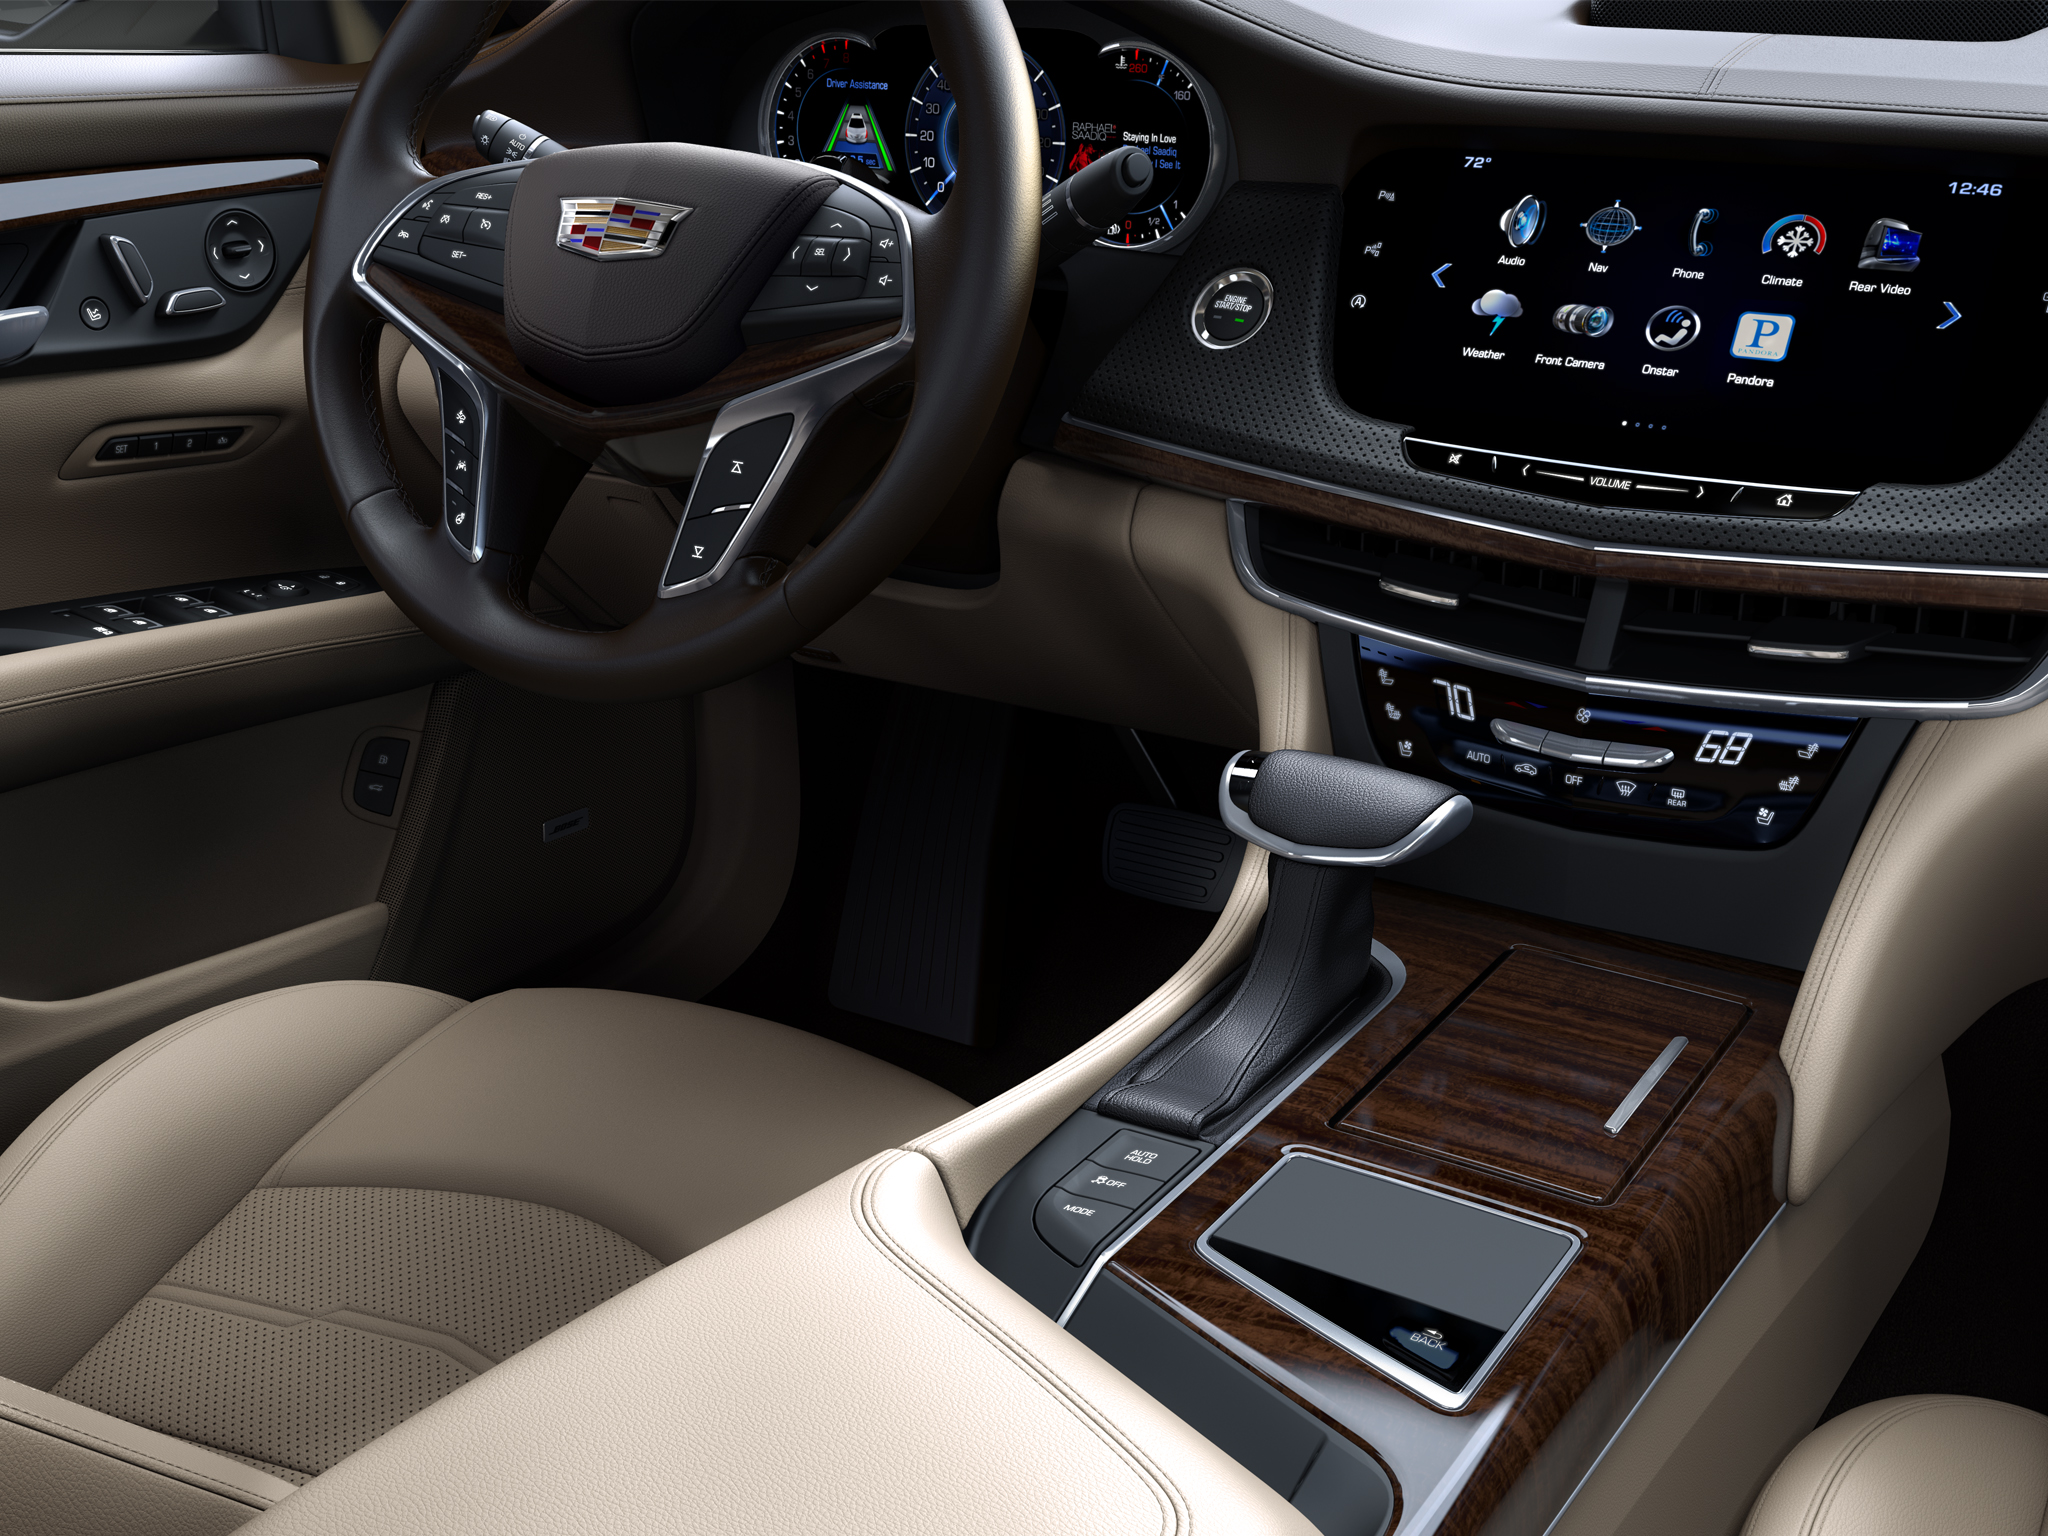 The 2016 Cadillac CT6 elevates to the top of the Cadillac range, and creates a new formula for the prestige sedan through the integration of new technologies developed to achieve dynamic performance, efficiency and agility previously unseen in large luxury cars. Pre-production model shown. (Cadillac)